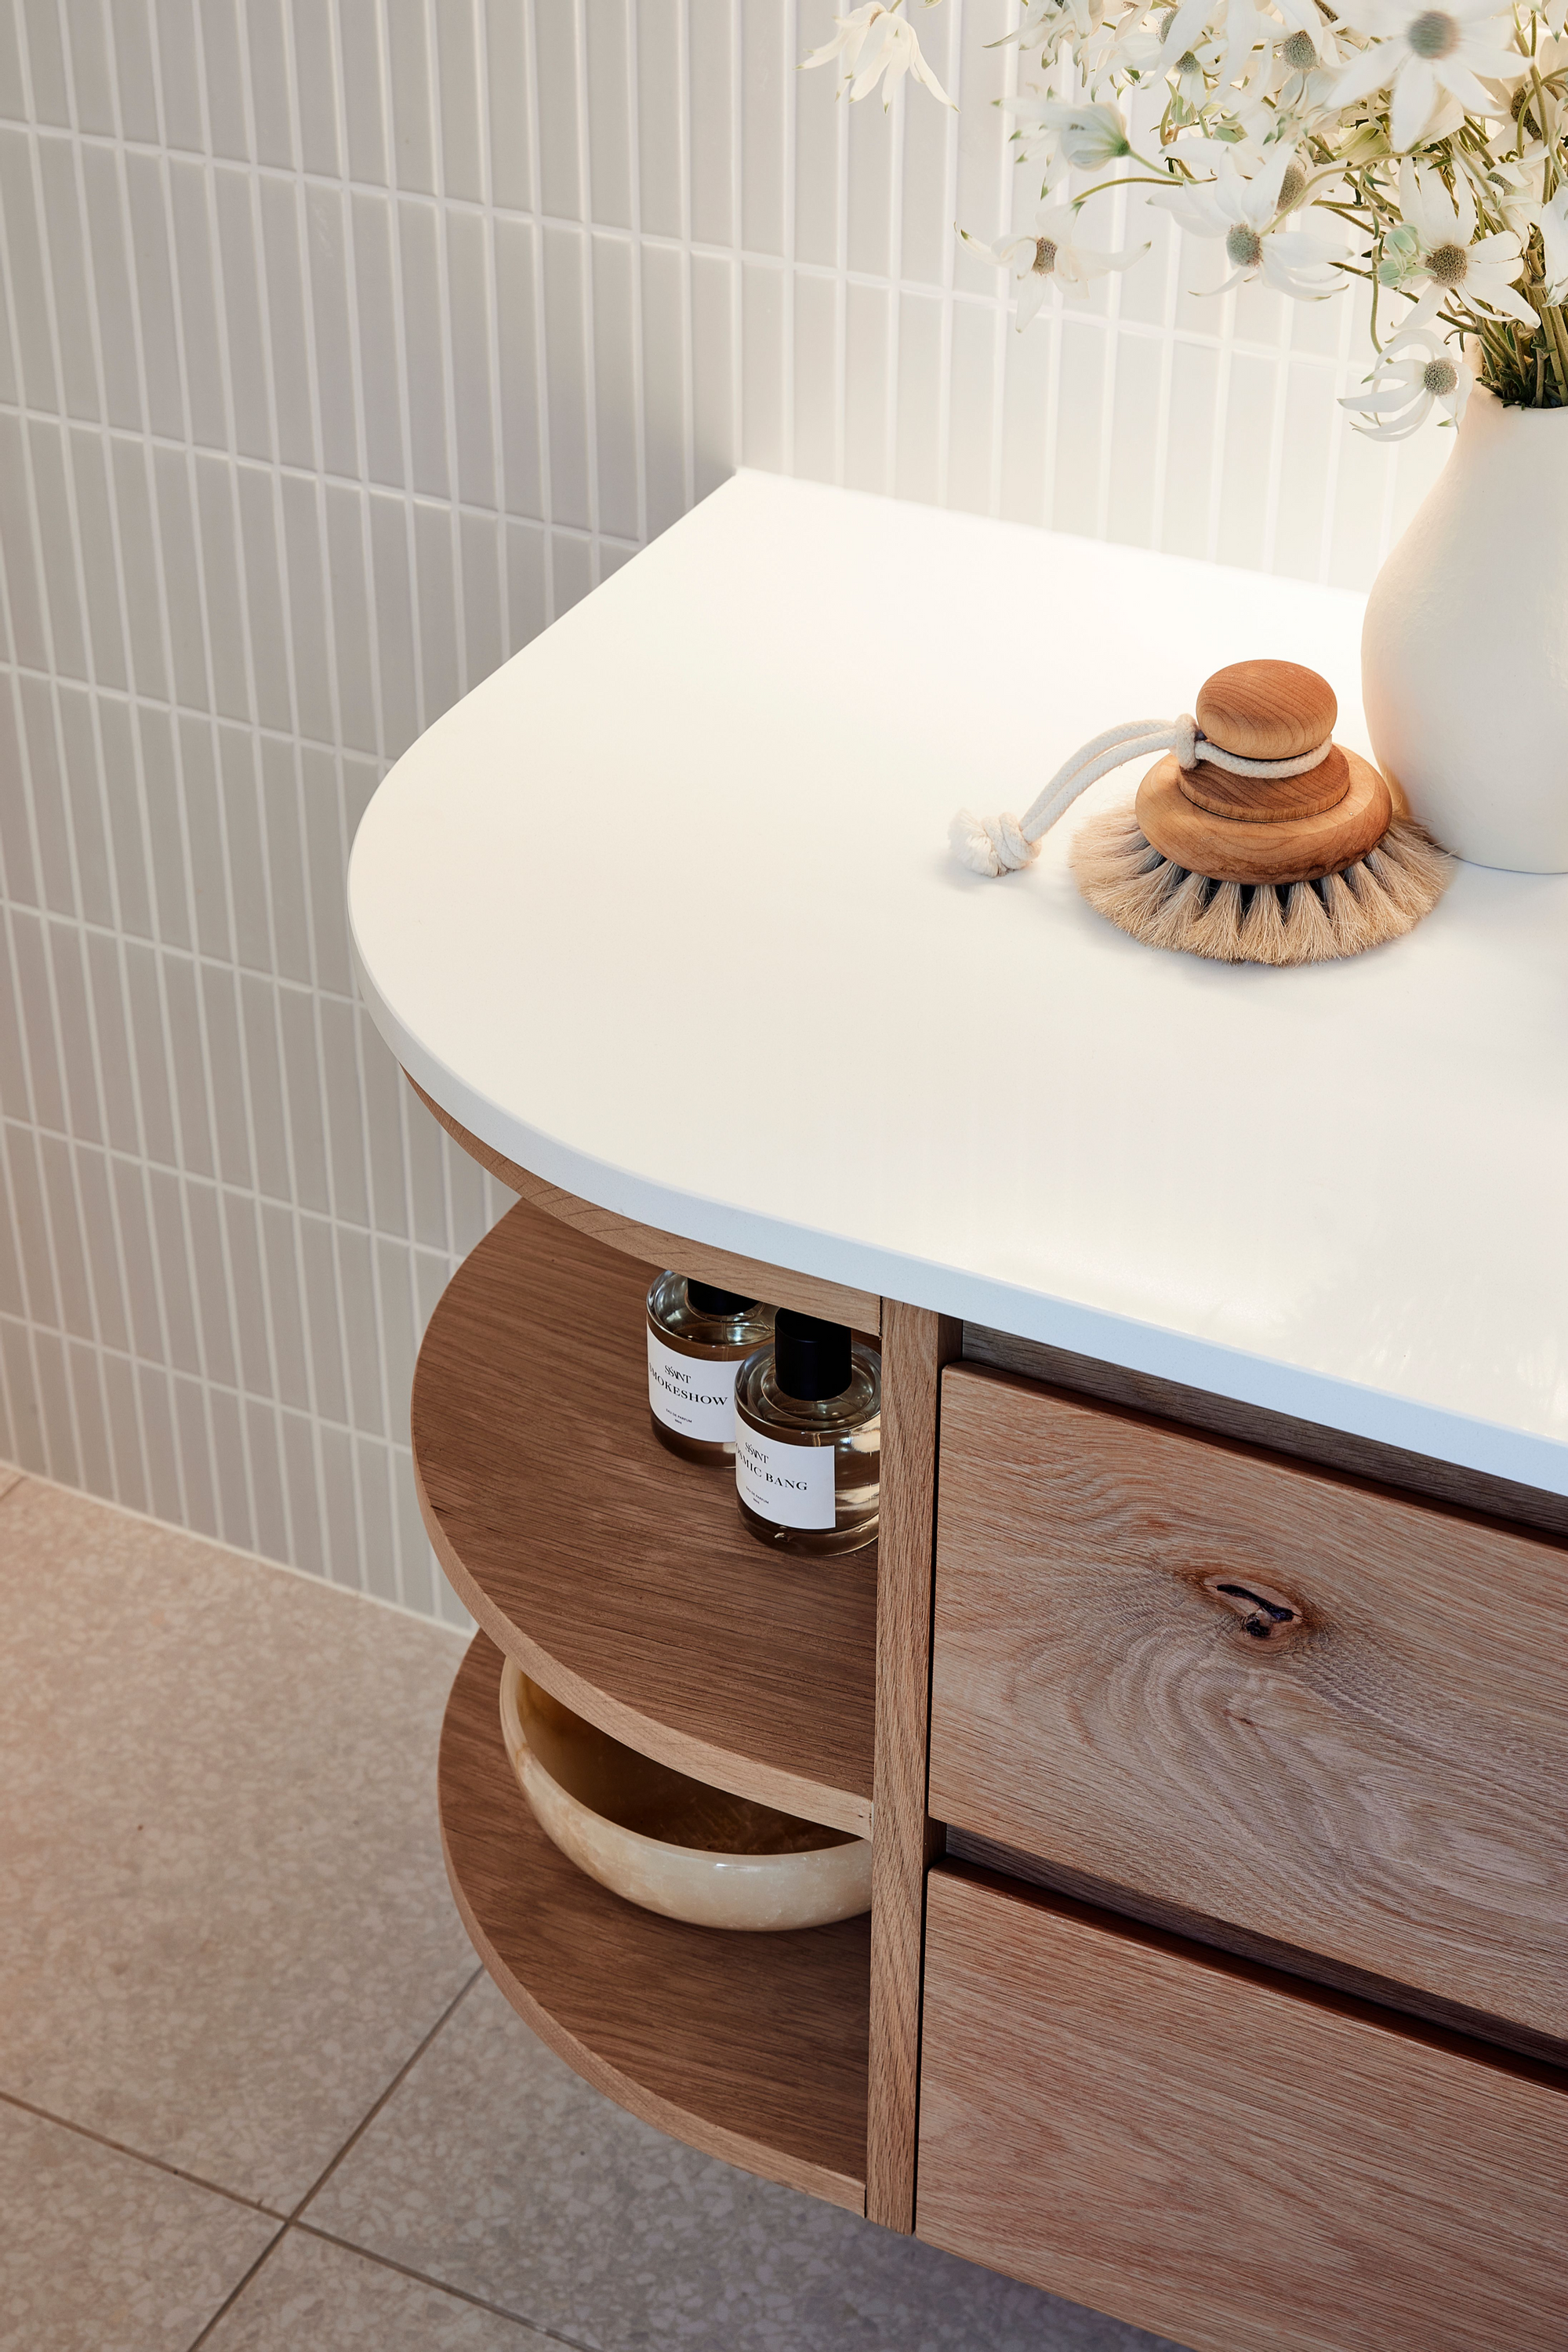 Bathroom Elegance: Transform Your Space with Stylish Vanities